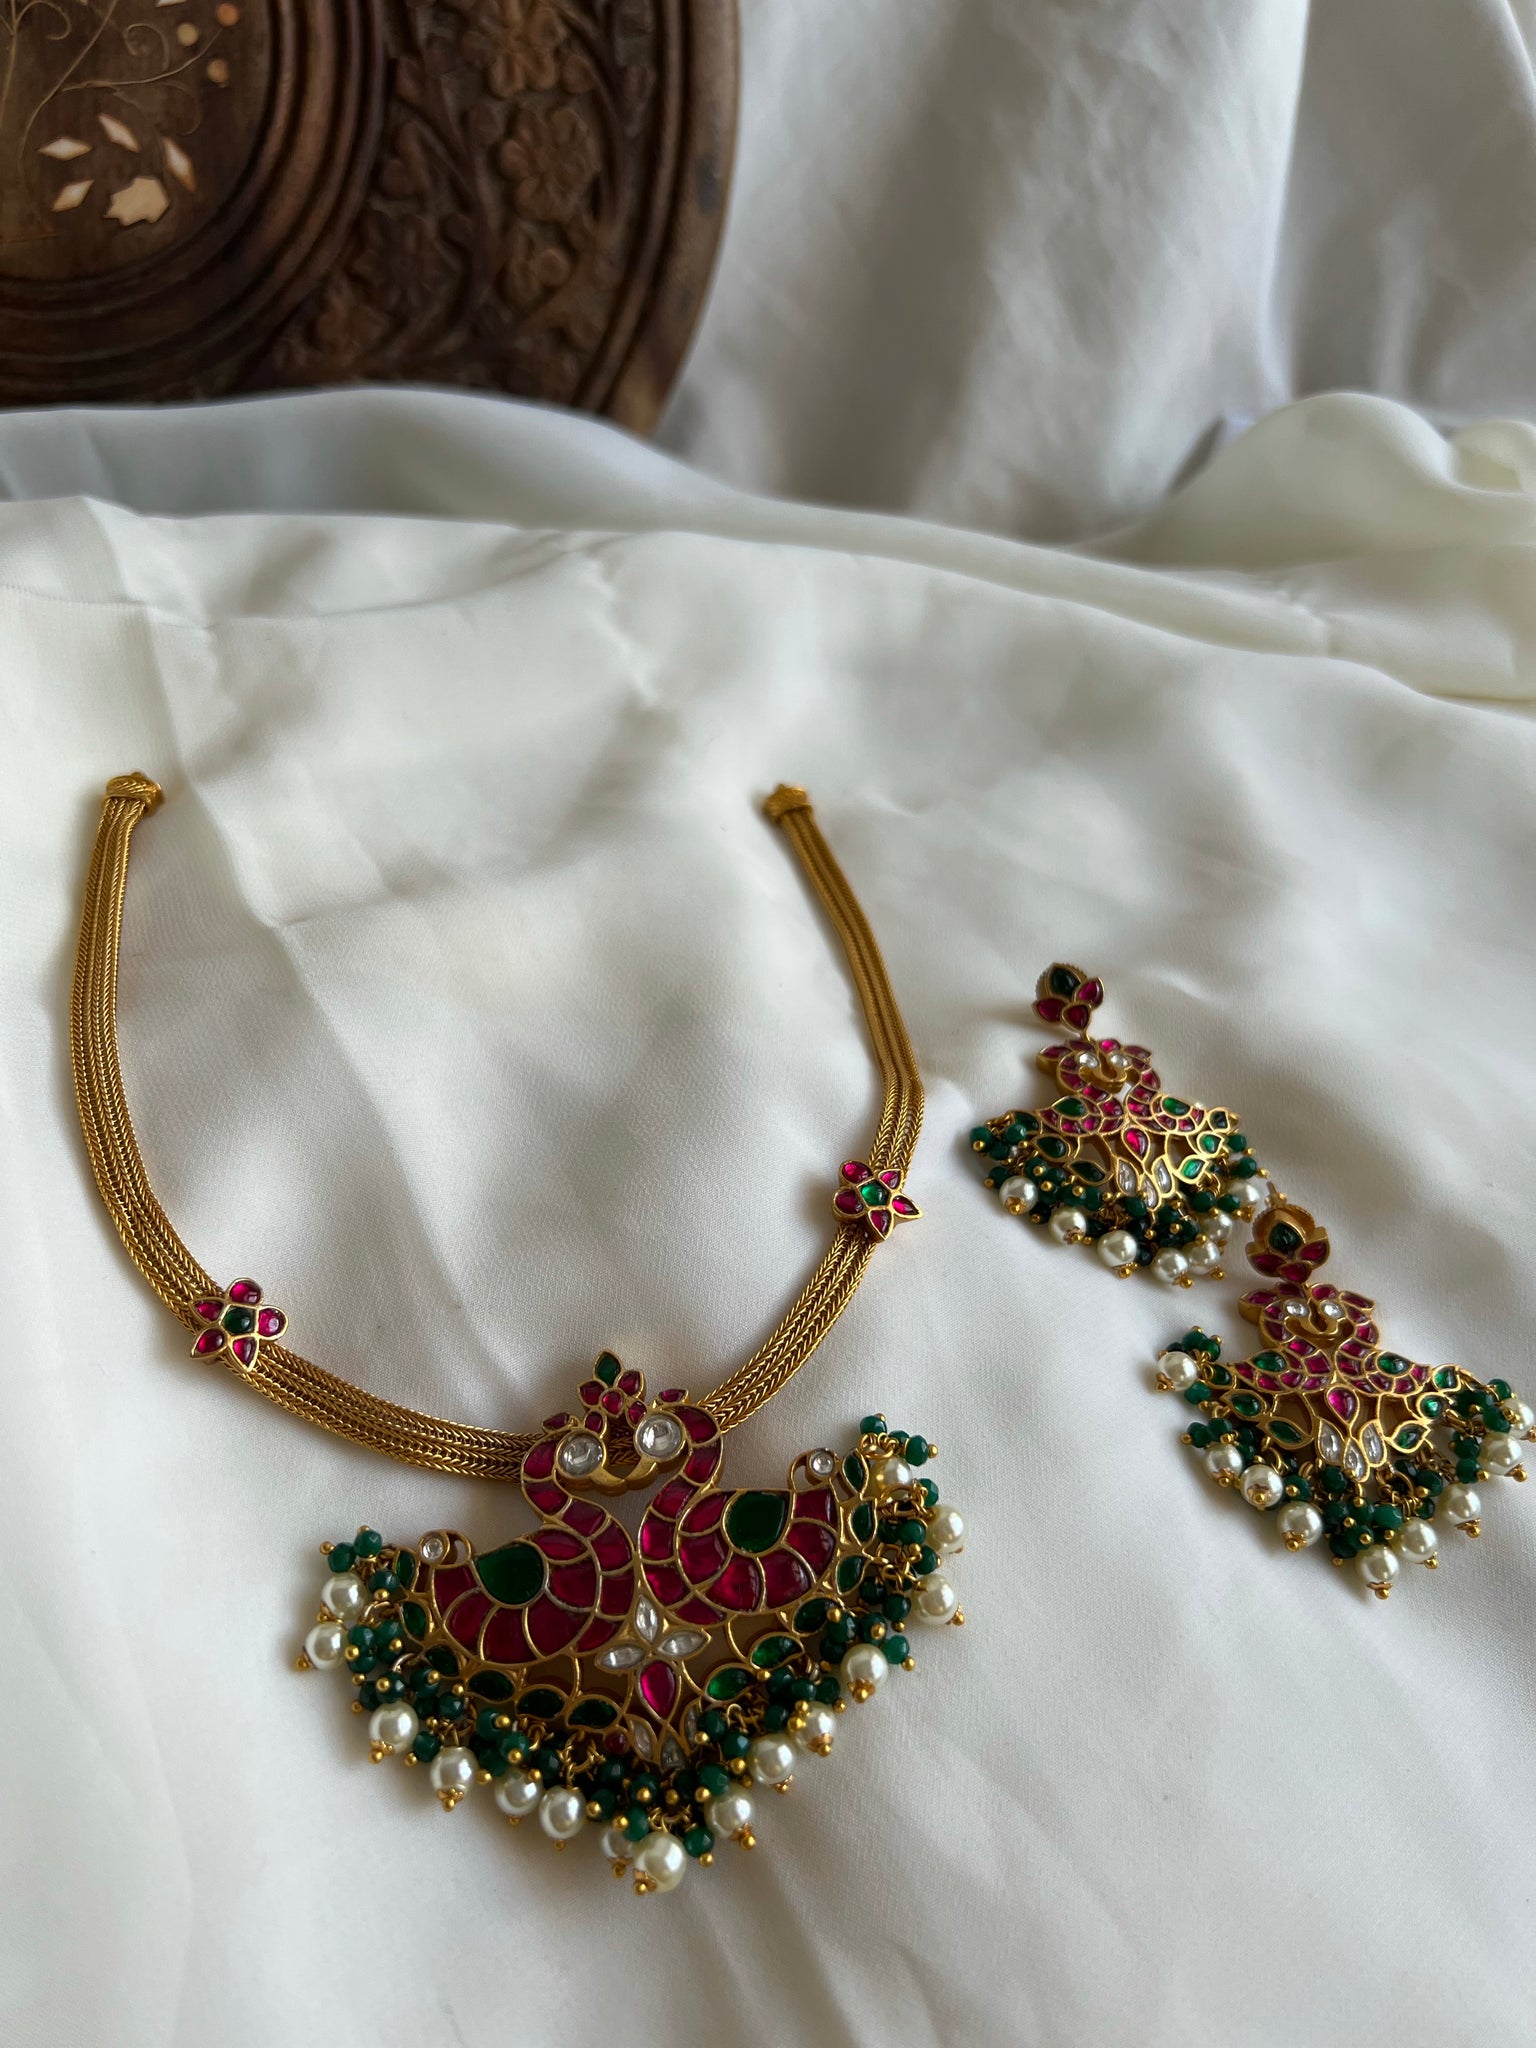 Annam pendant necklace with earrings